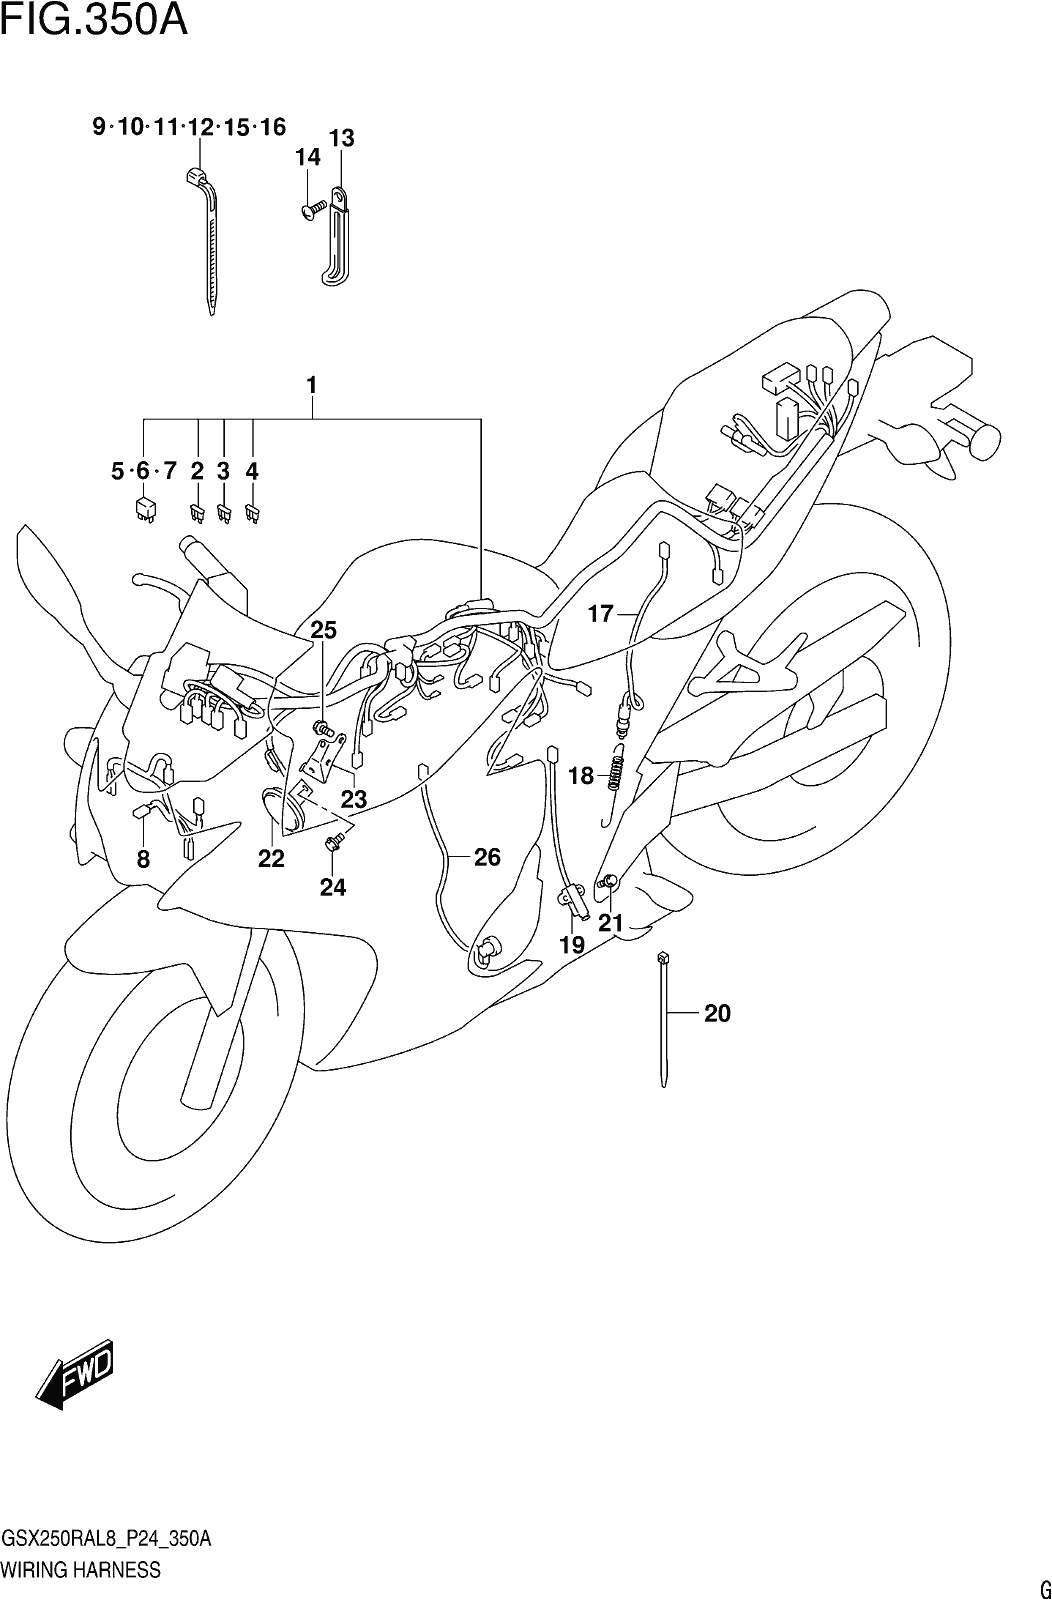 Fig.350a Wiring Harness